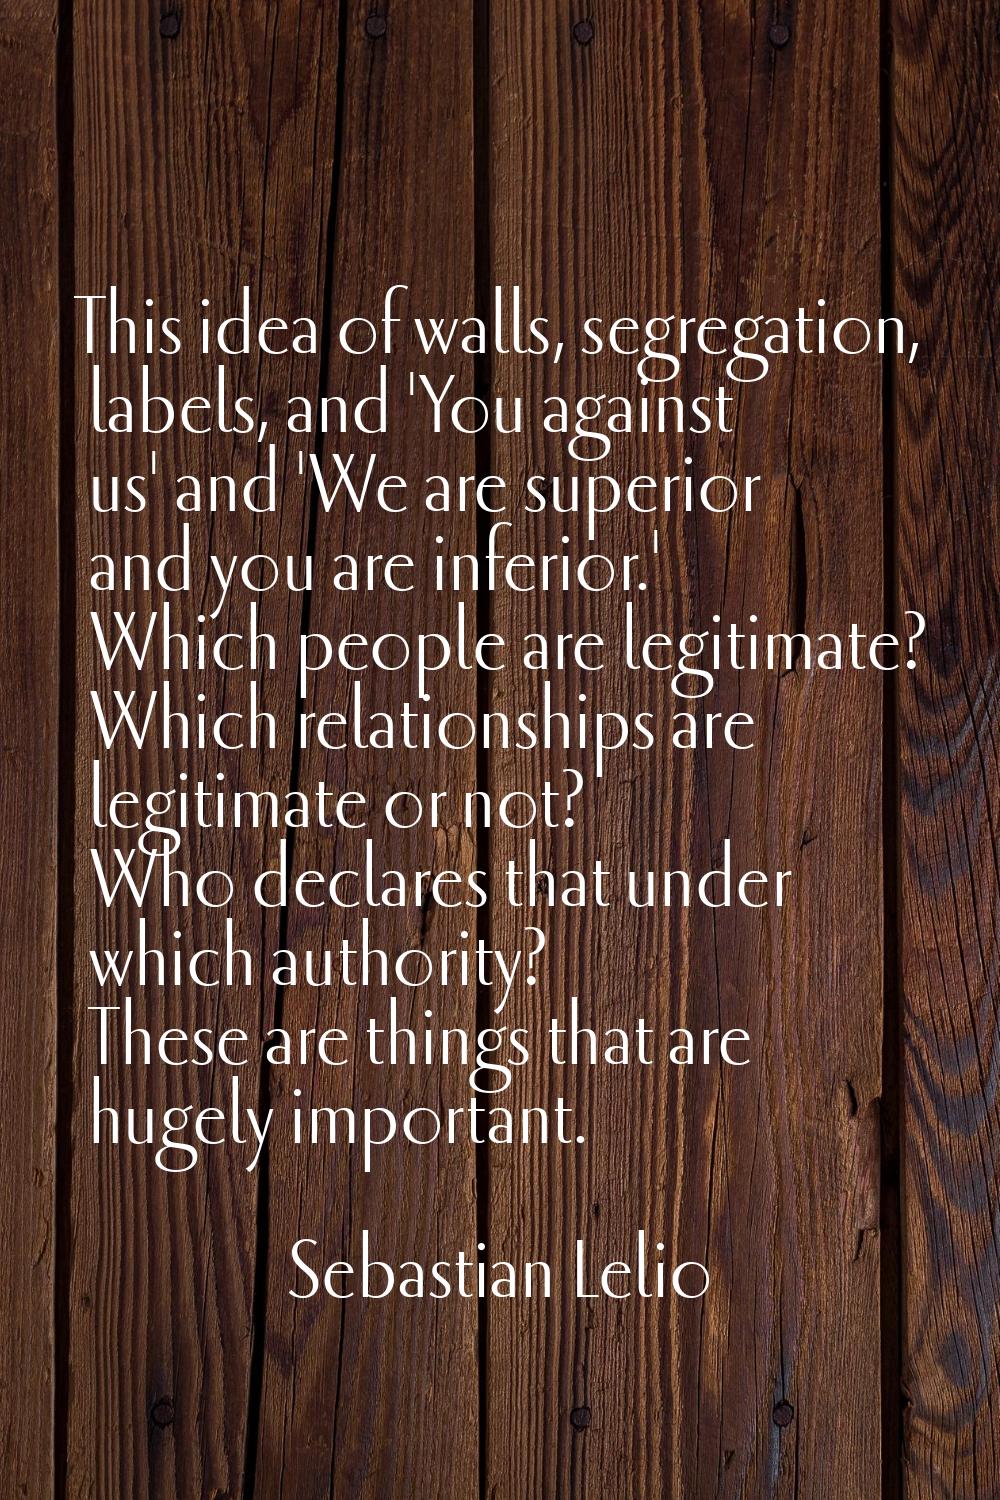 This idea of walls, segregation, labels, and 'You against us' and 'We are superior and you are infe